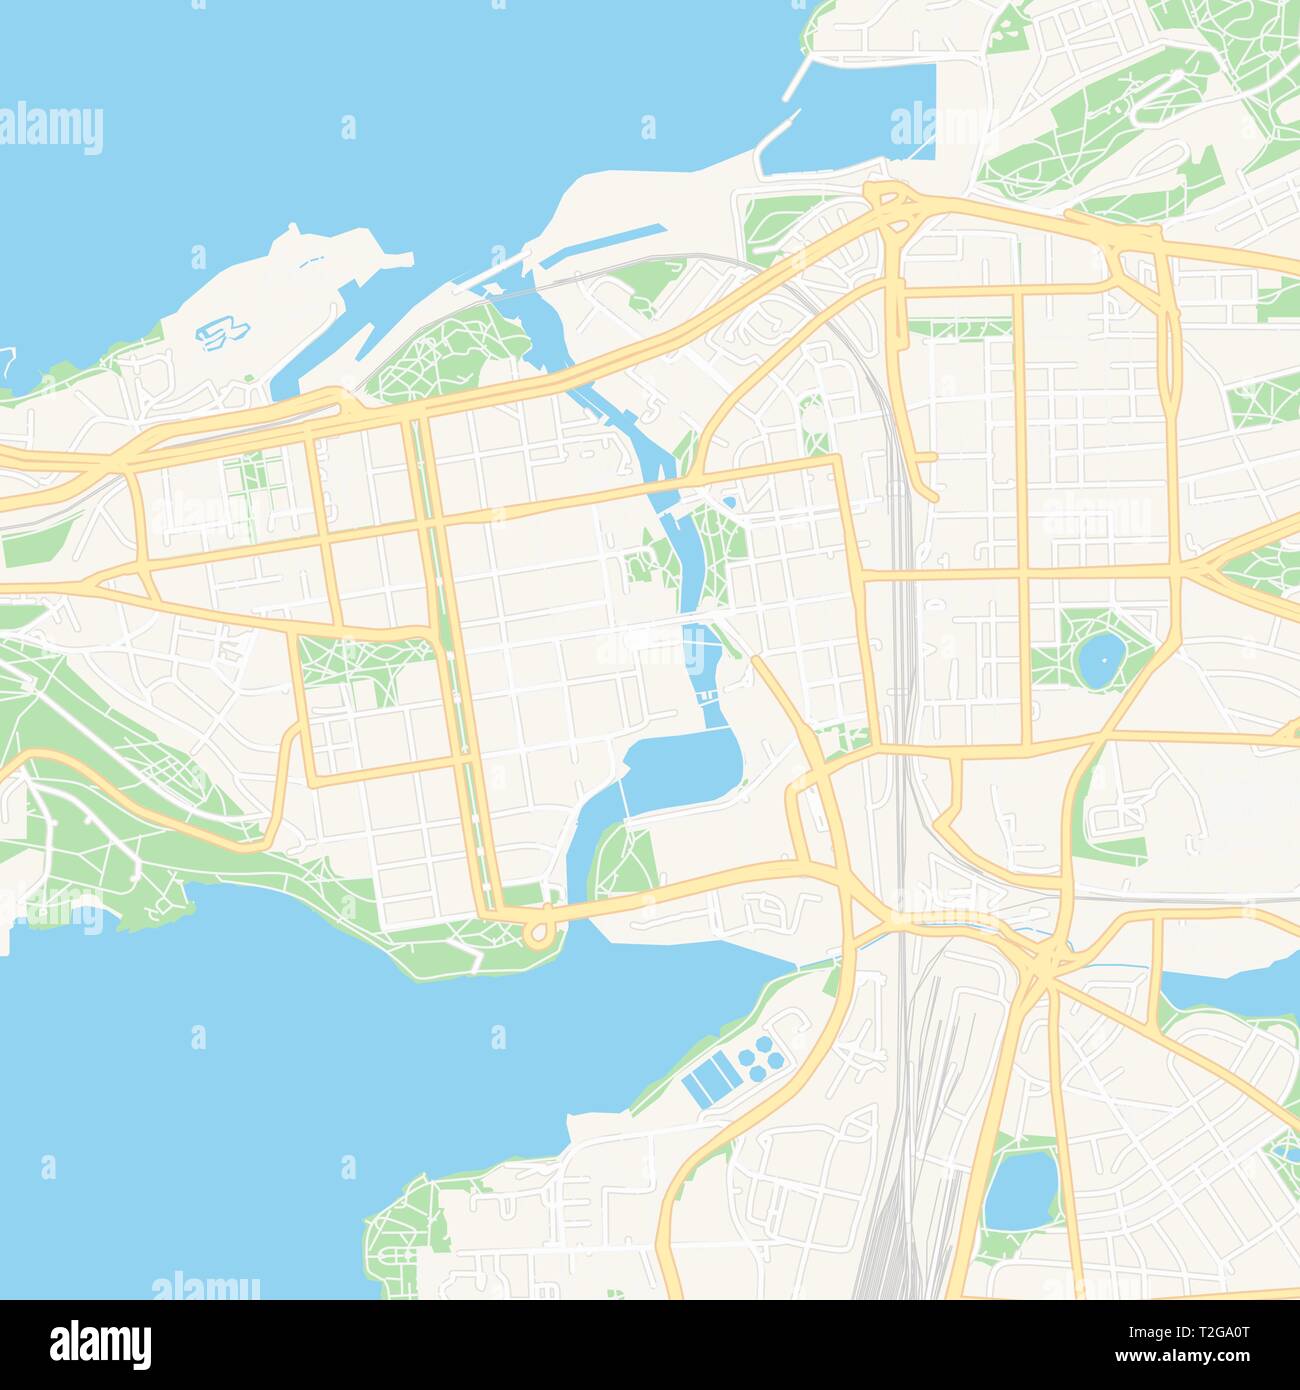 Printable map of Tampere, Finland with main and secondary roads and larger railways. This map is carefully designed for routing and placing individual Stock Vector